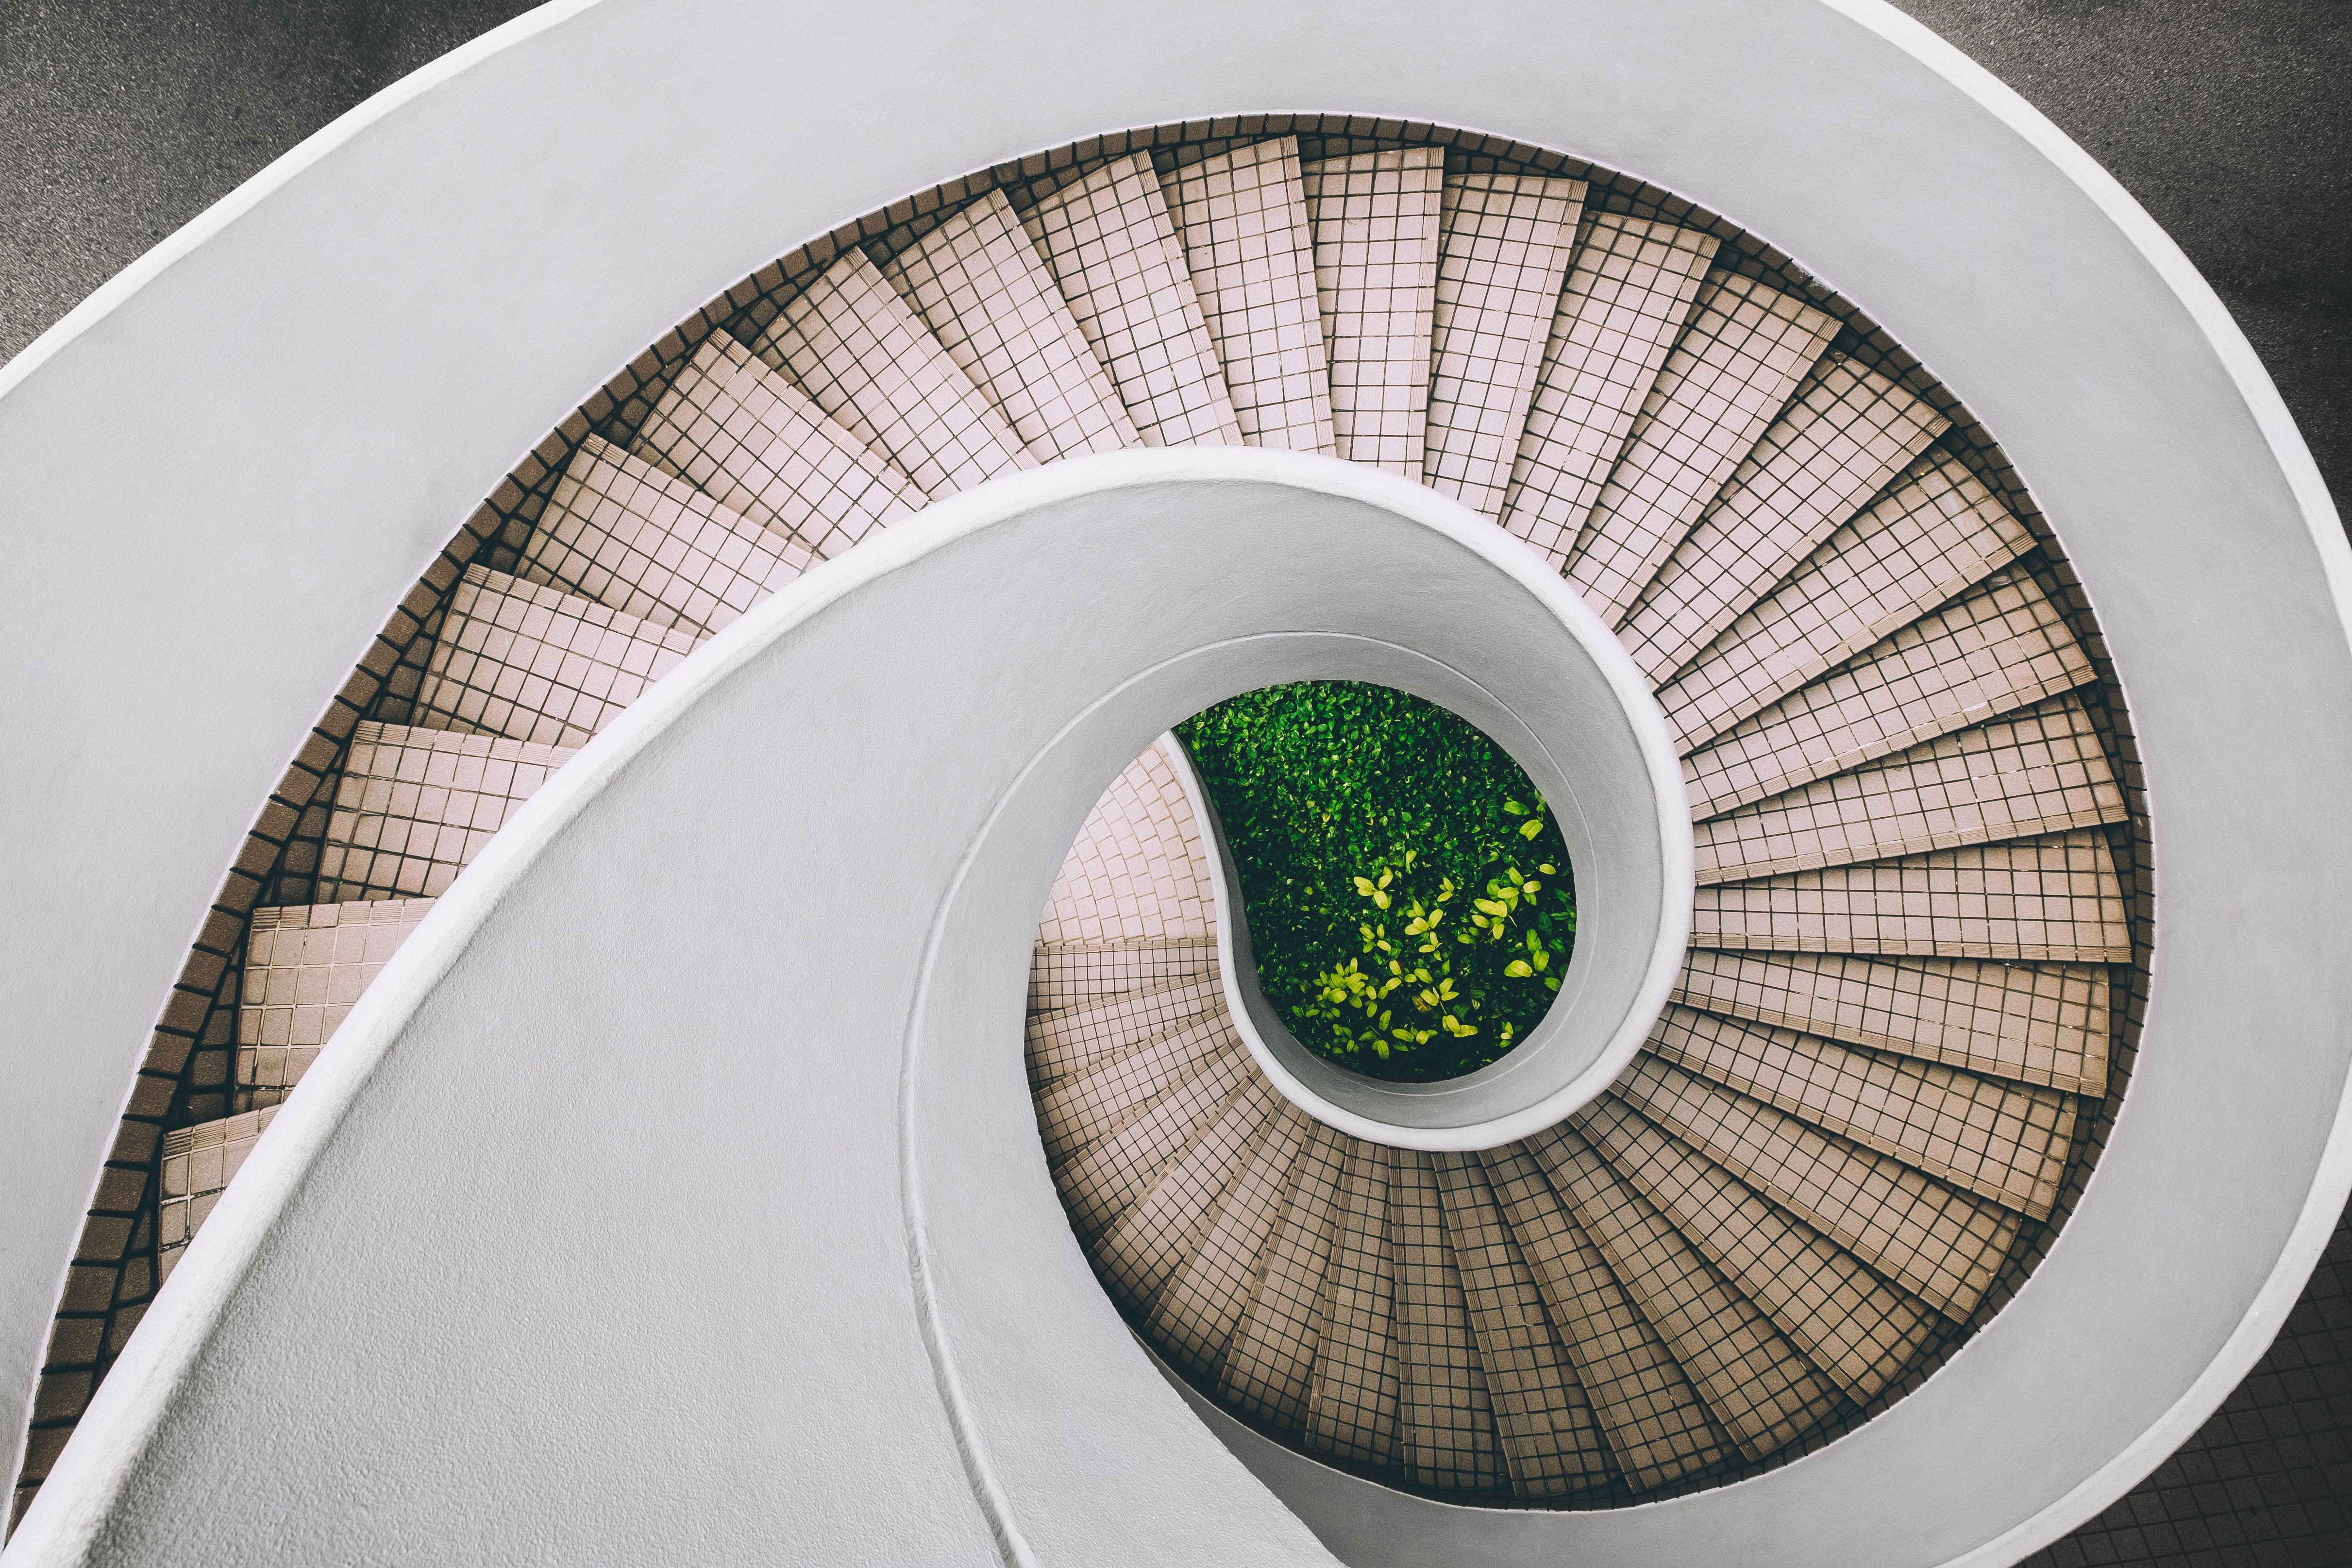 A spiral staircase with a green plant at the bottom - Architecture